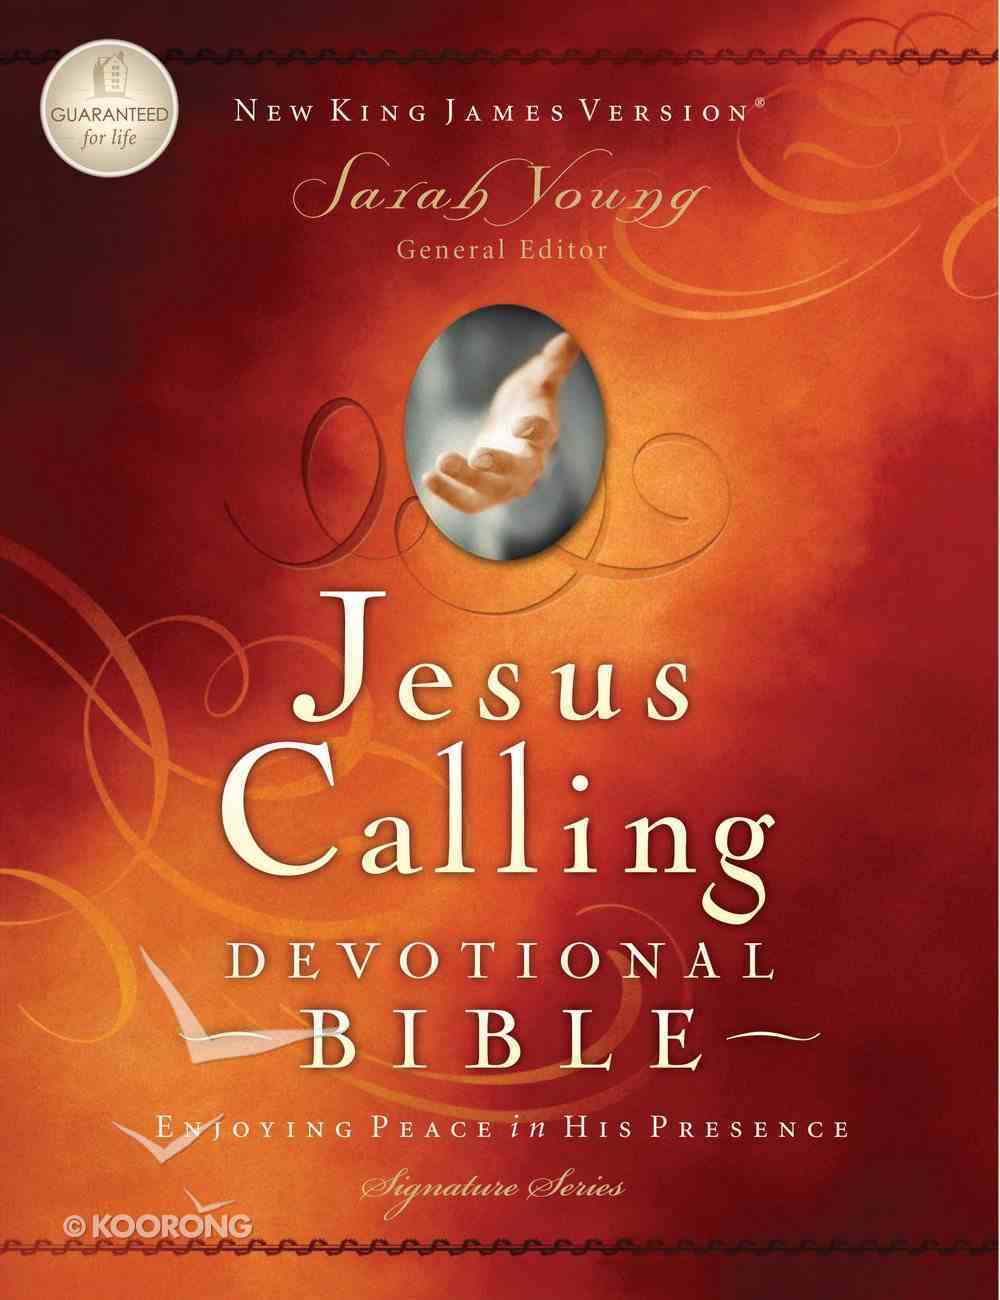 NKJV Jesus Calling Devotional Bible by Sarah Young (Ed